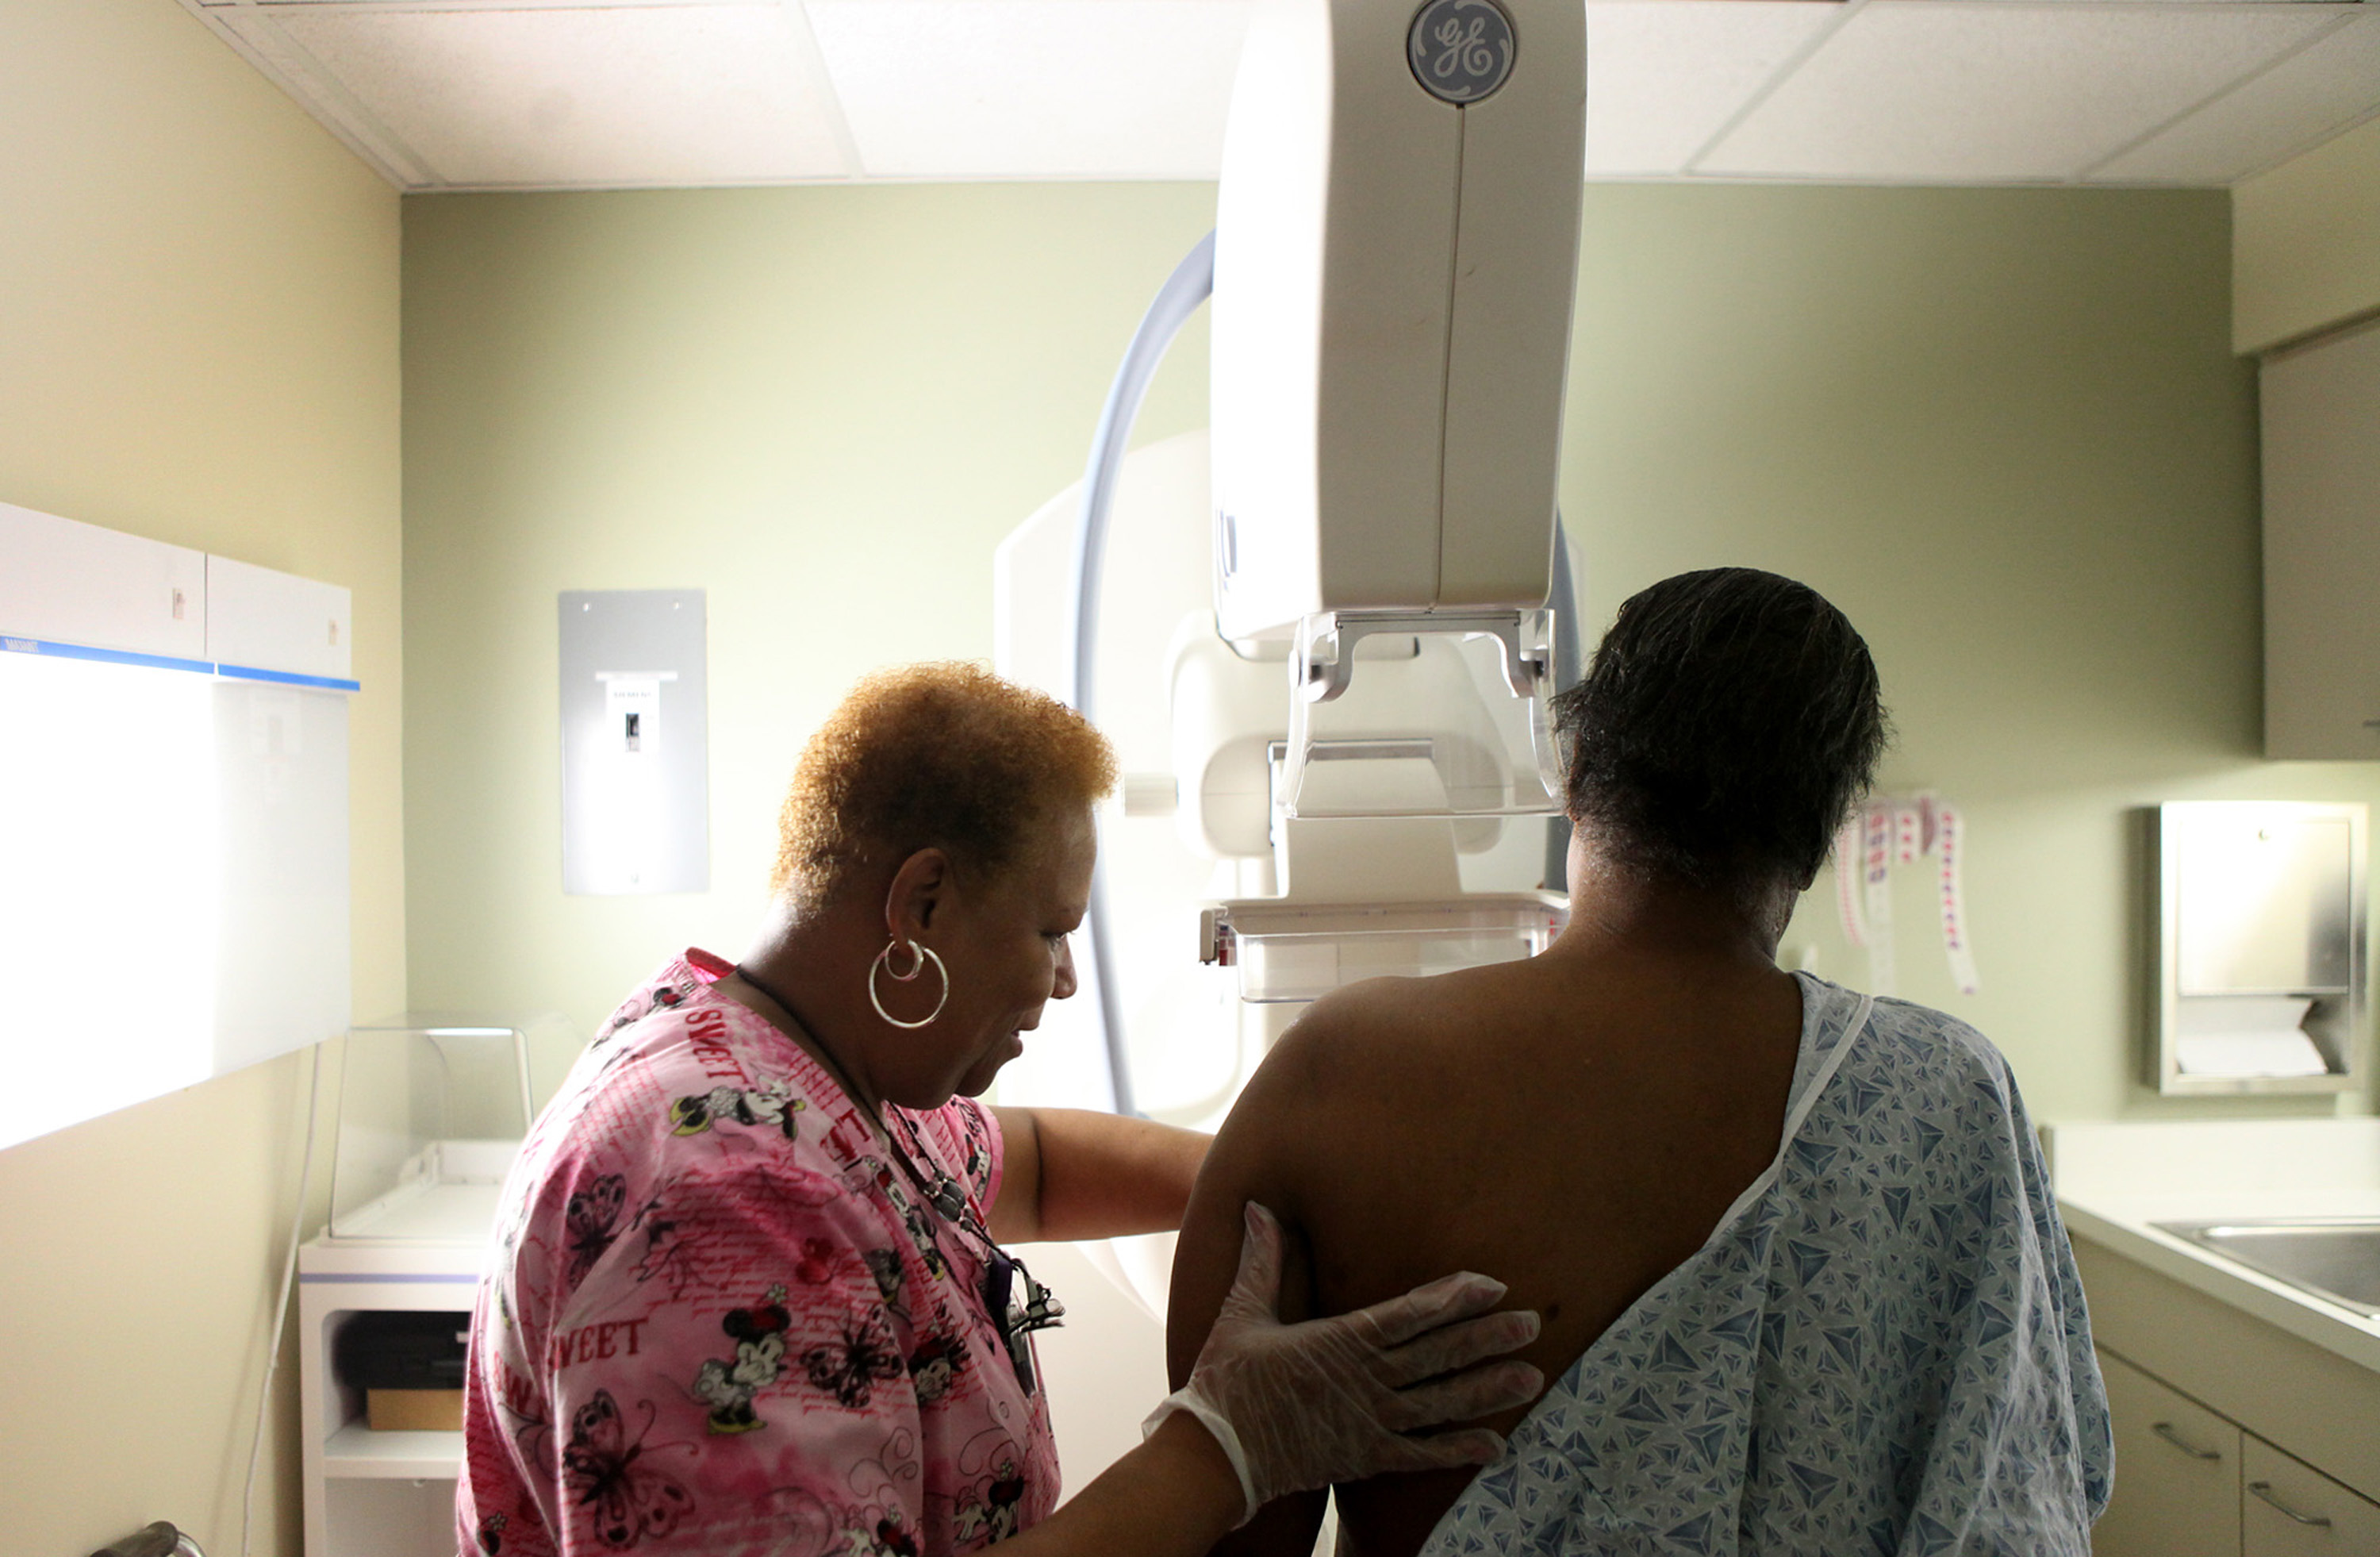 Betty Daniel, right, of Chicago, gets her routine yearly mammogram from Lead Mammography Tech Stella Palmer at Mt. Sinai Hospital in Chicago, February 15, 2012. (Heather Charles—Chicago Tribune/MCT/Getty Images)